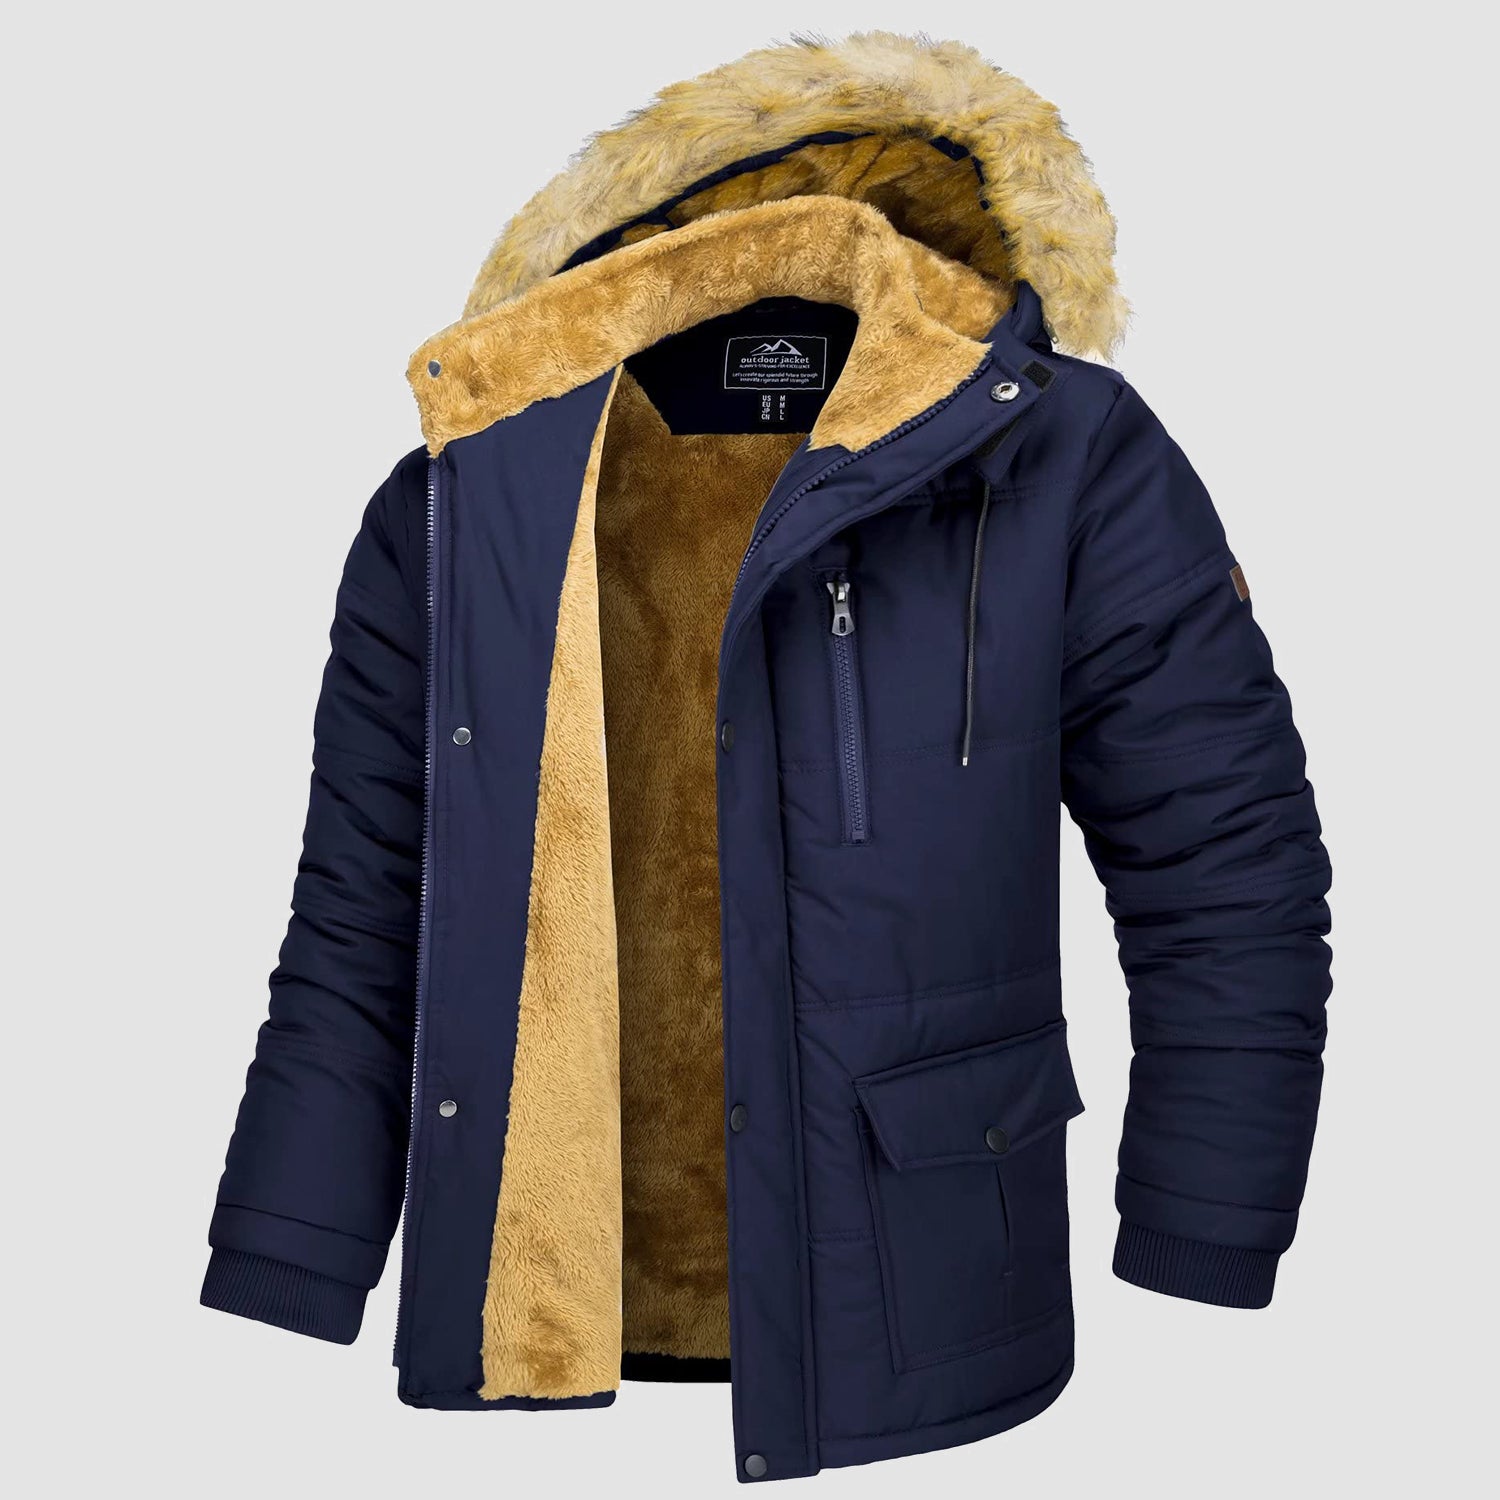 Men's Hooded Winter Coat Puffer Jacket Thicken Warm Fur Down Parka Jacket with Removable Hood